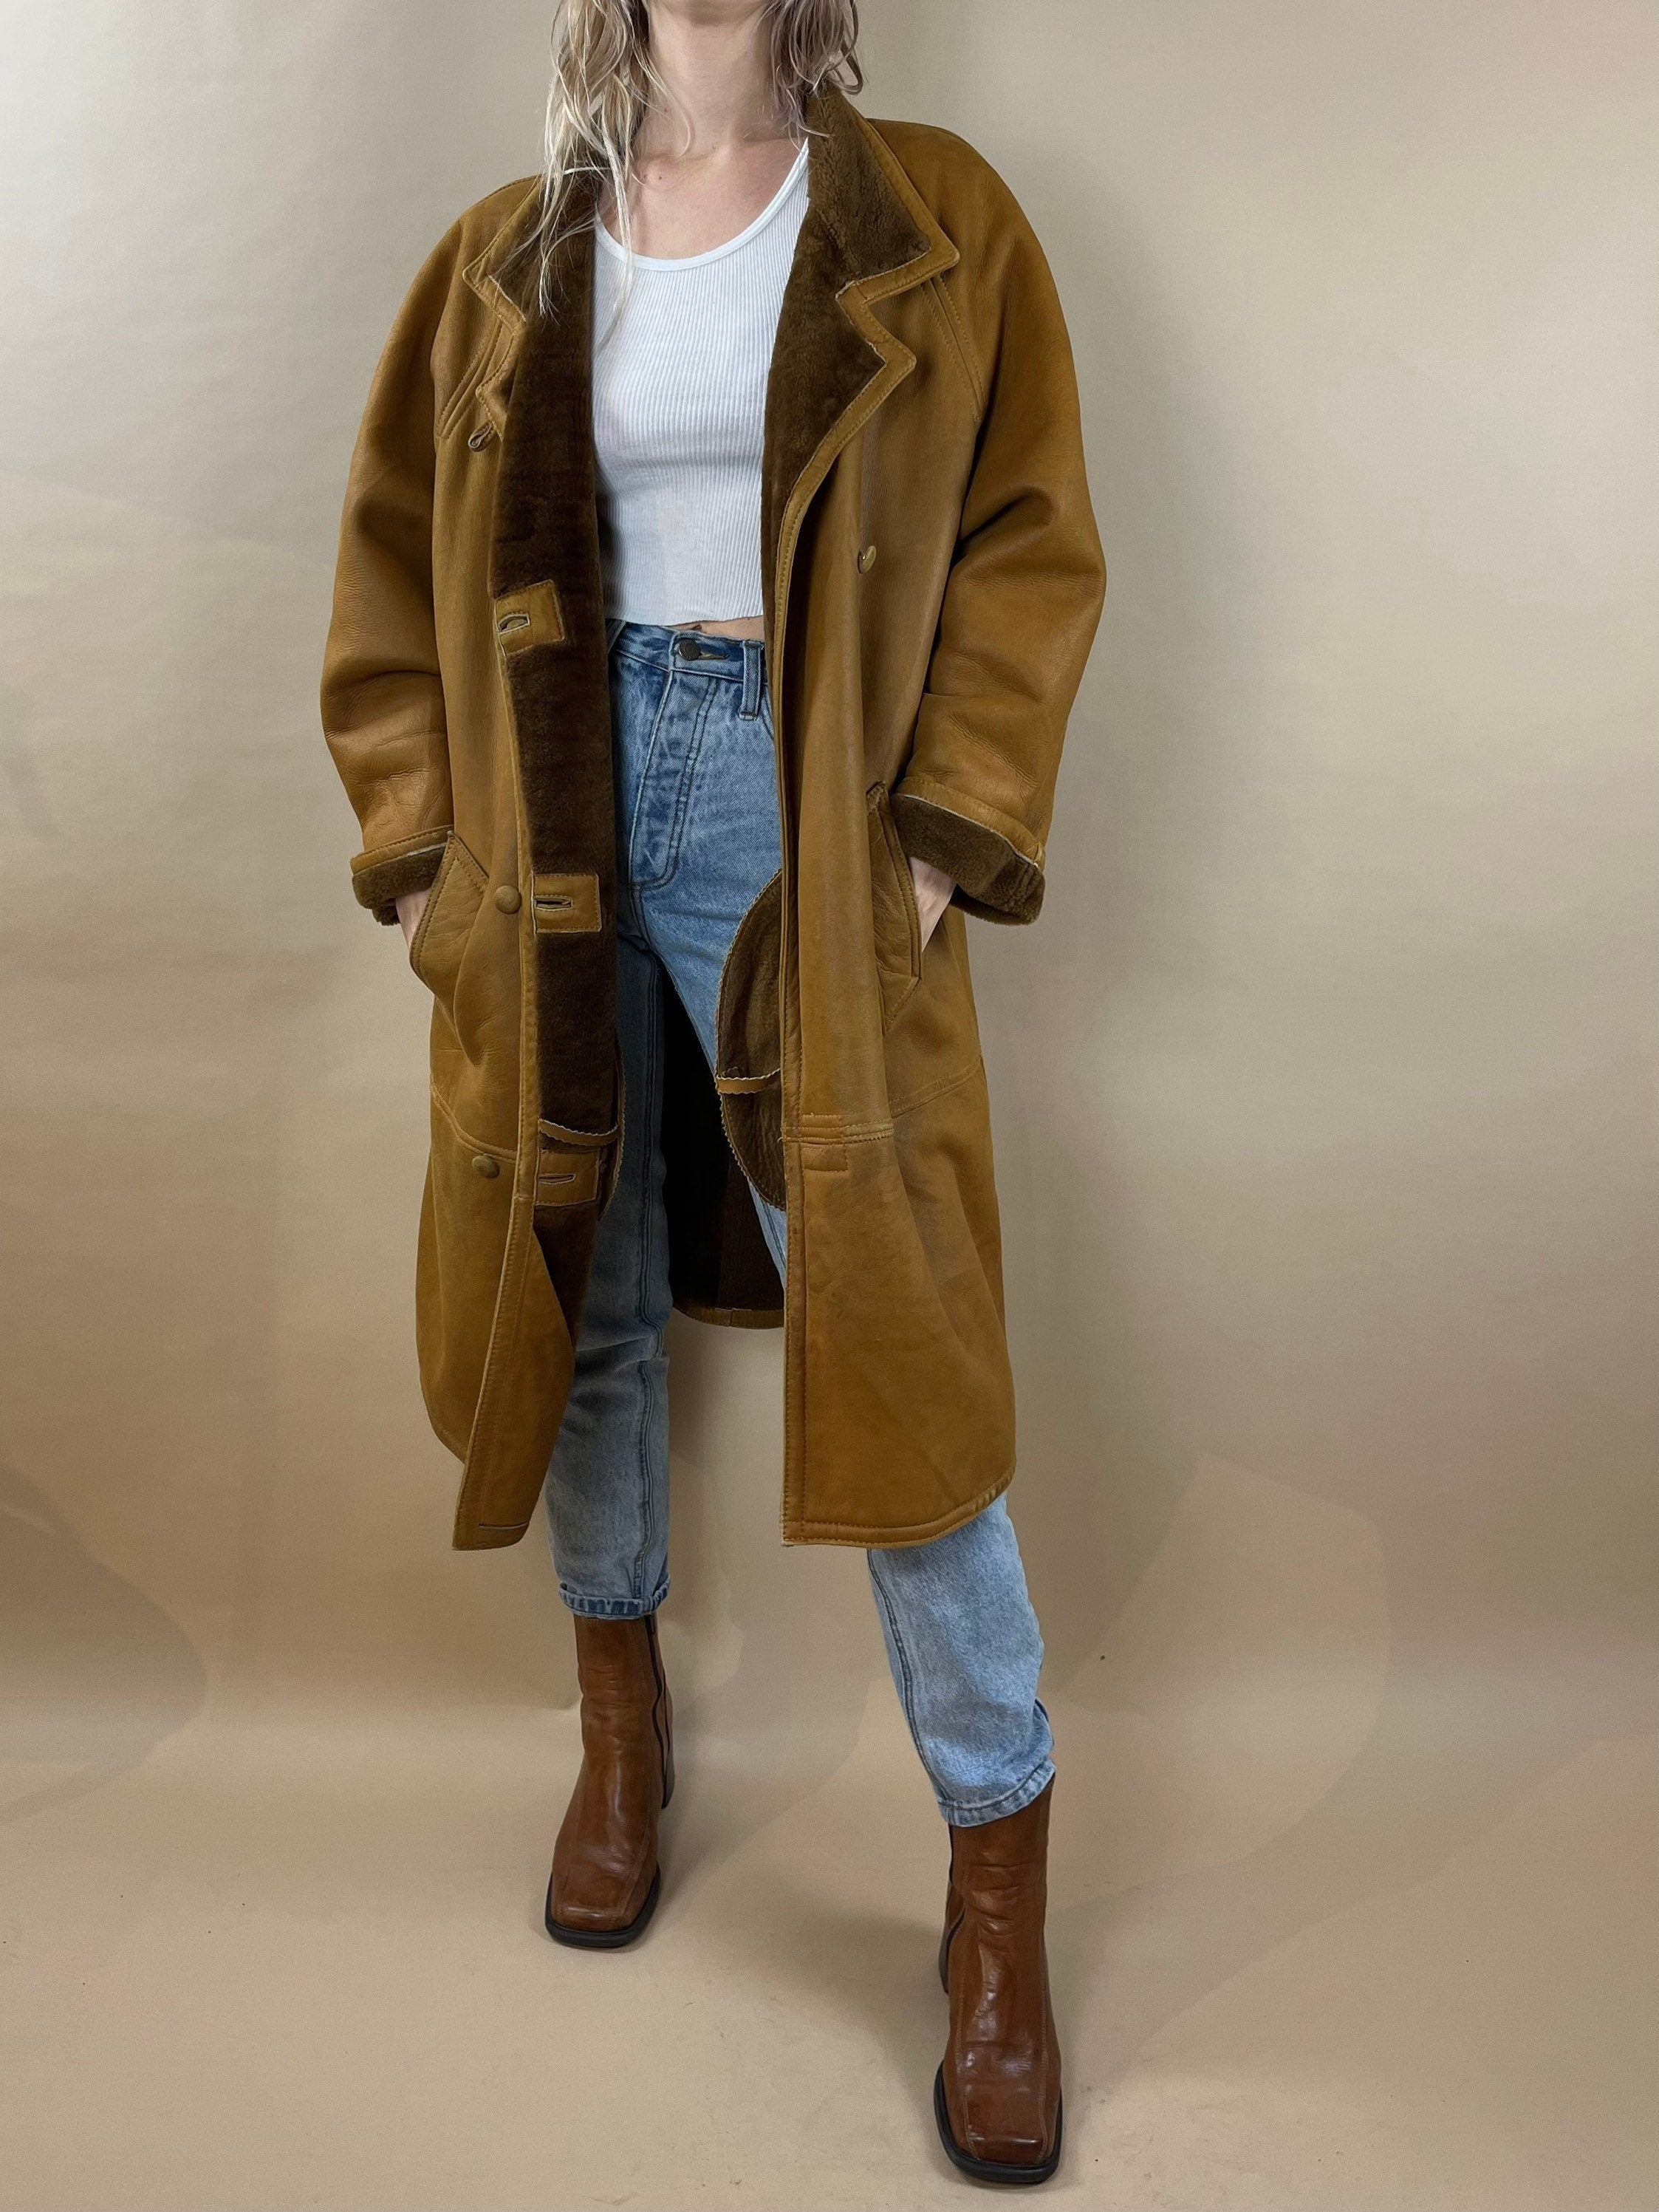 80s Tan Leather Trench Coat / Faux Fur Lined / Winter Coat